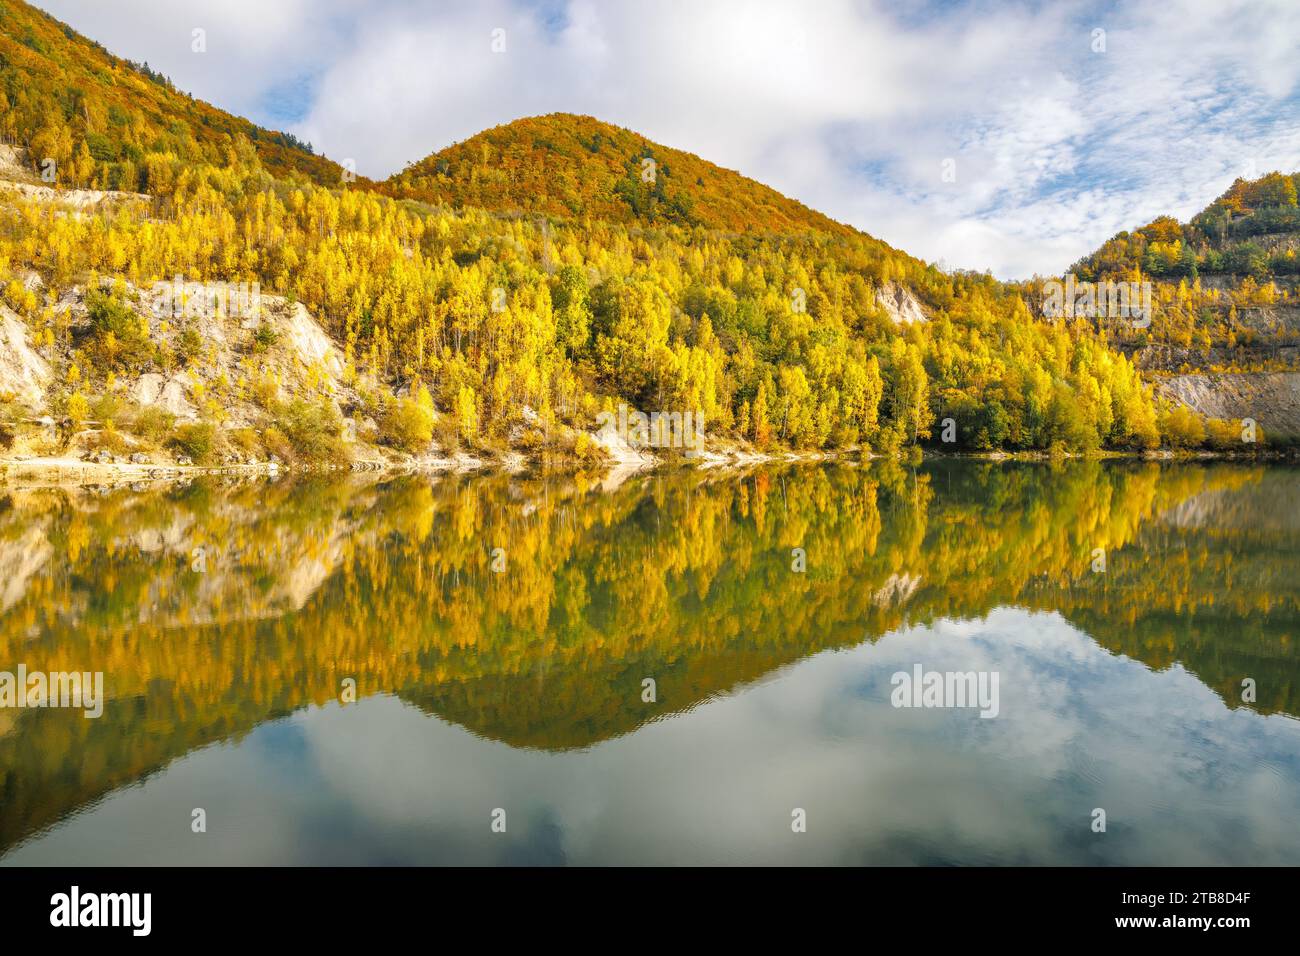 Autumn landscape with reflection of colorfull hills in the lake. Flooded quarry near the village Sutovo in Slovakia, Europe. Stock Photo